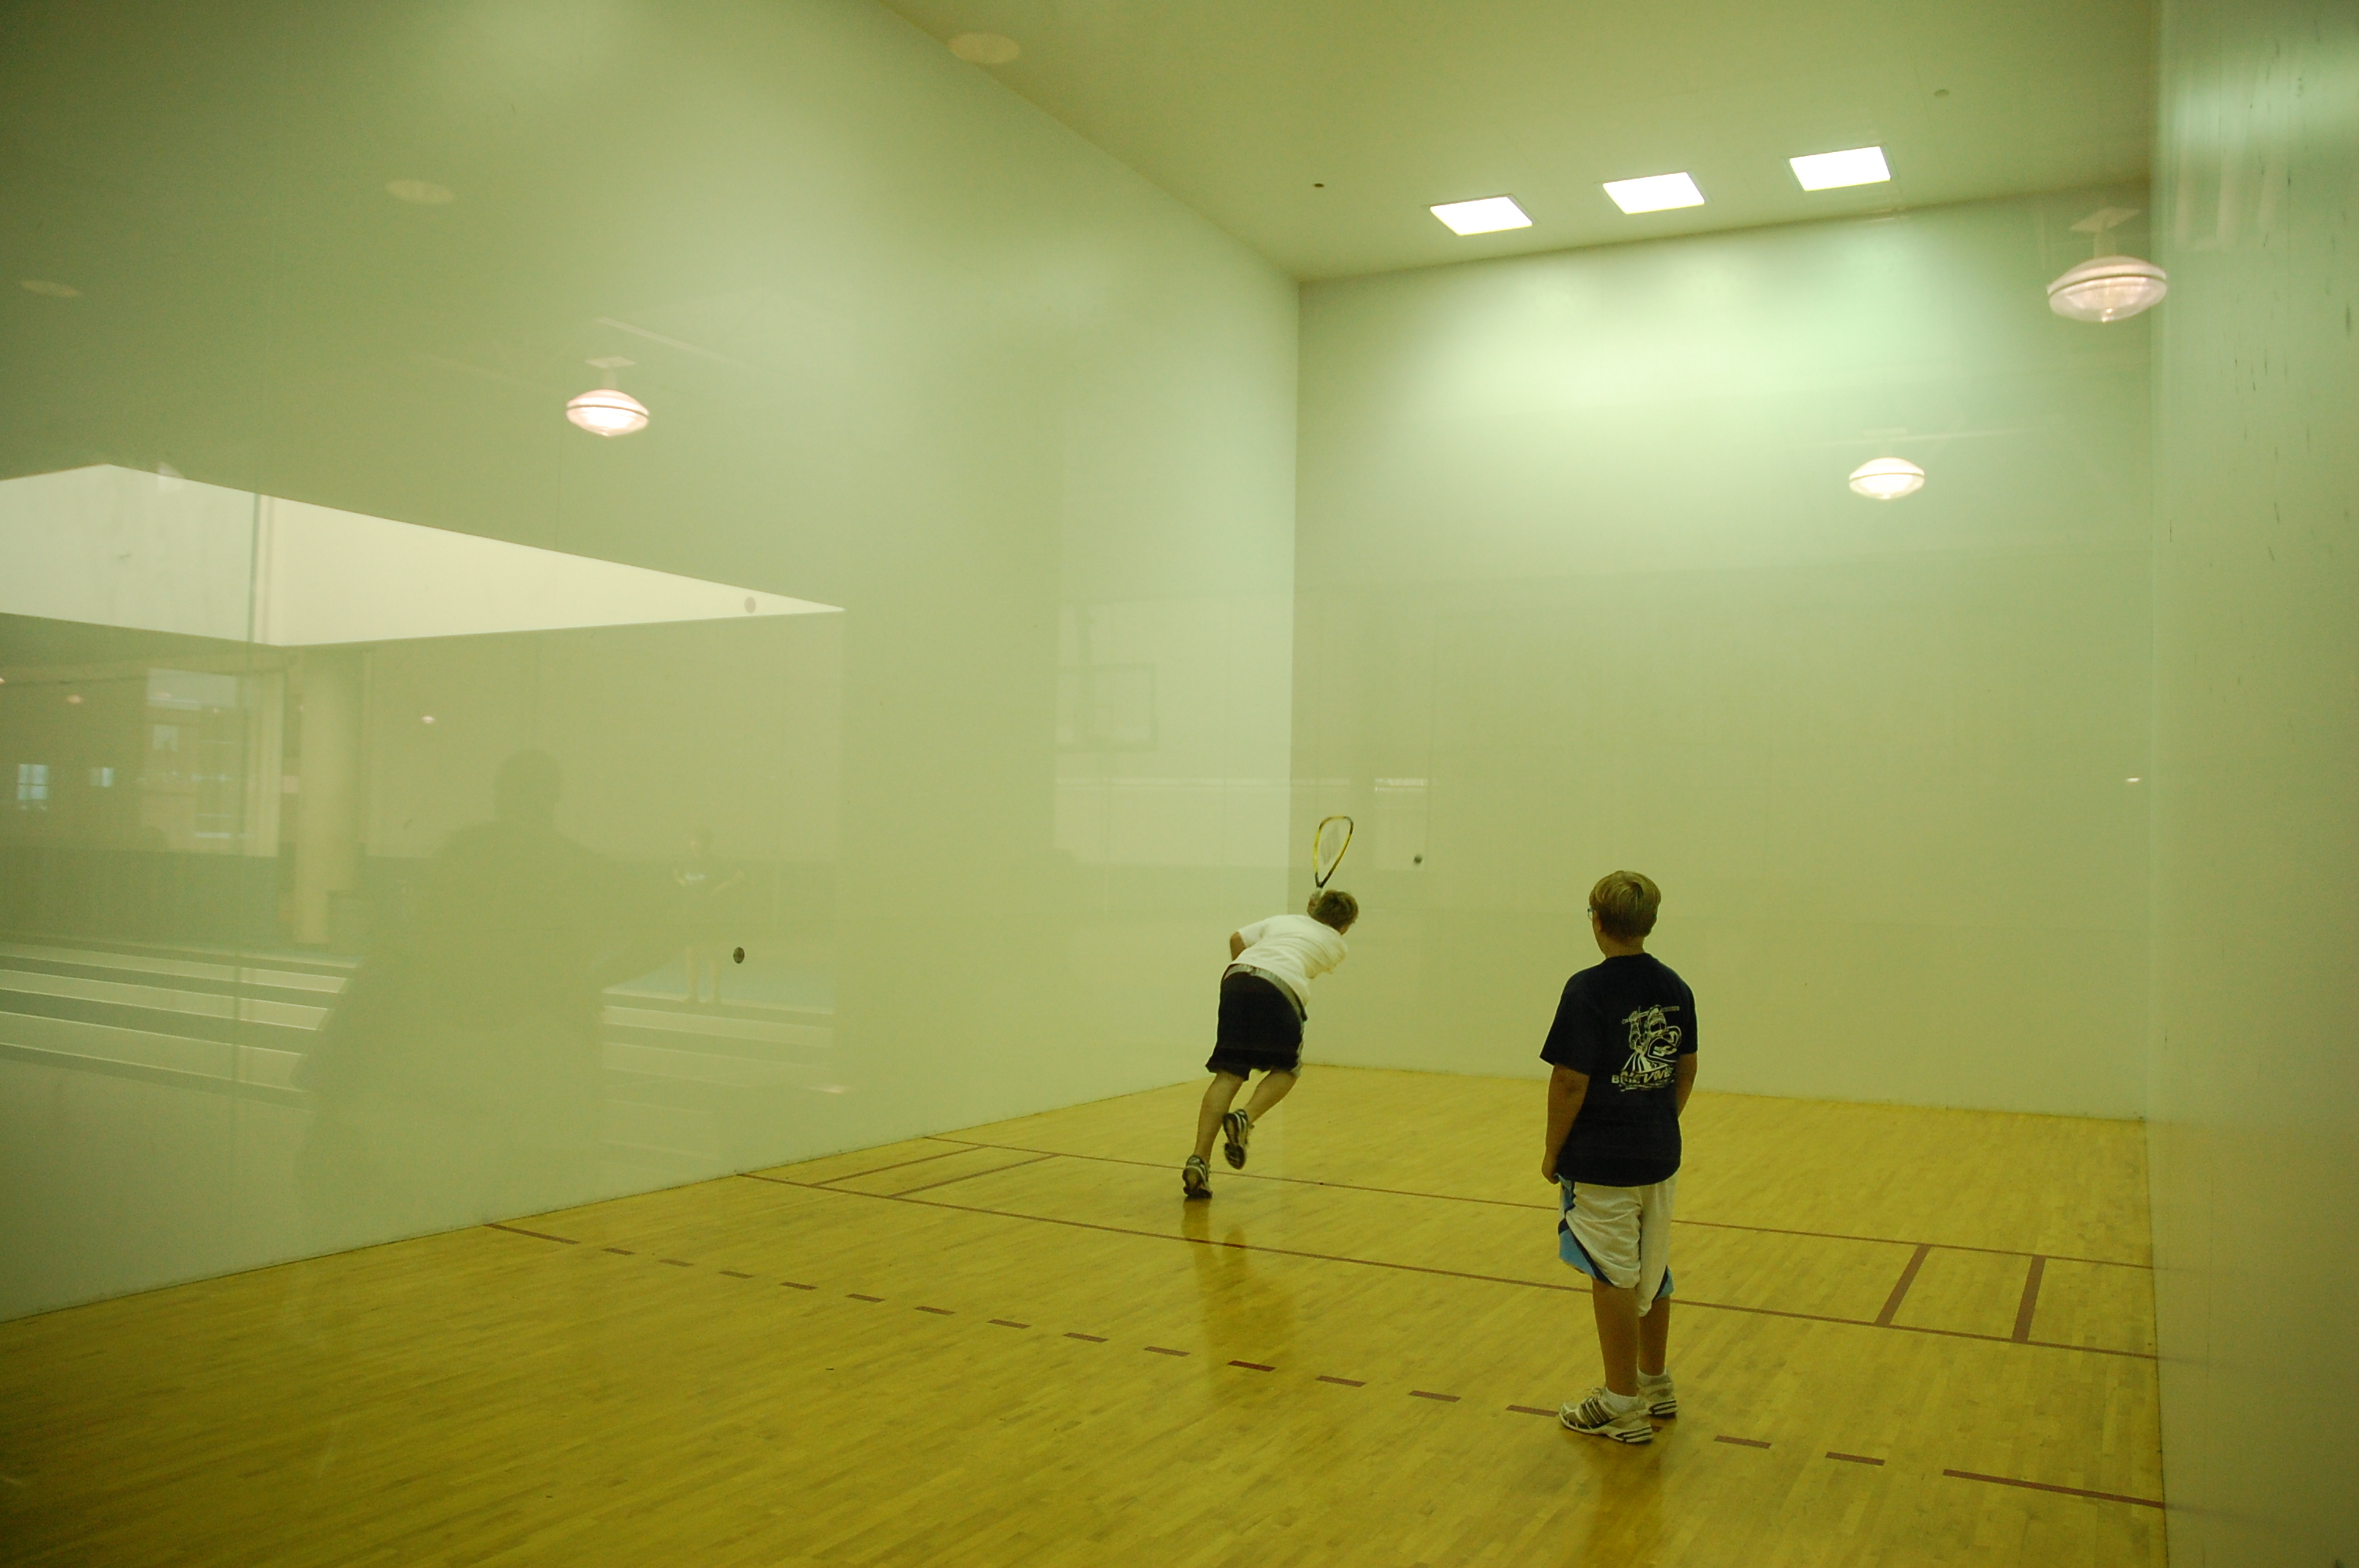 Two students play raquetball